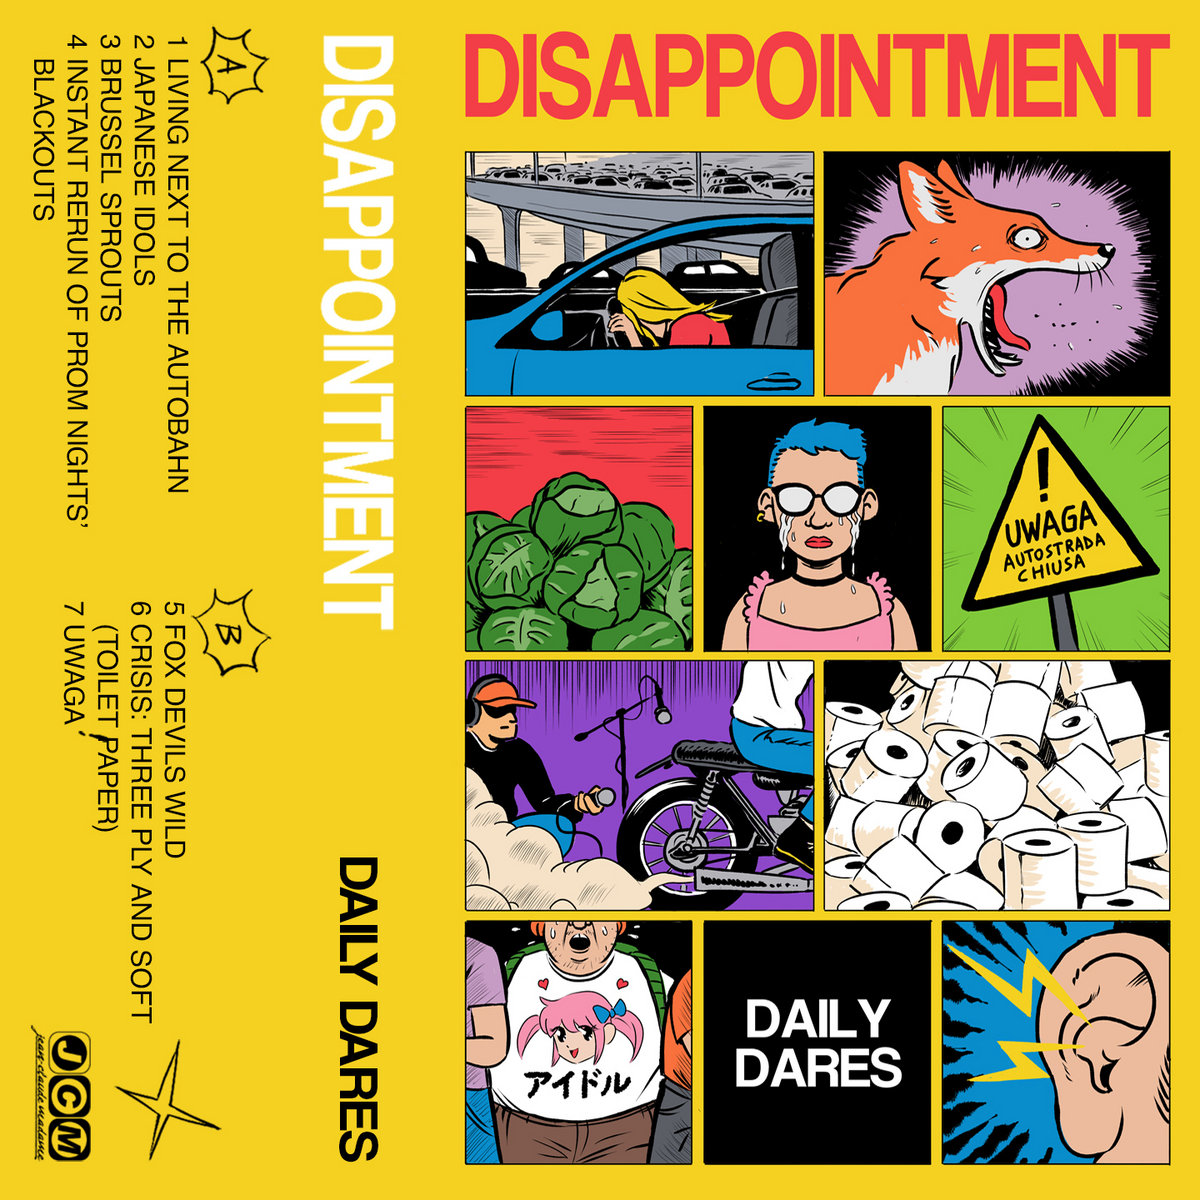 Disappointment - Daily Dares - Cover